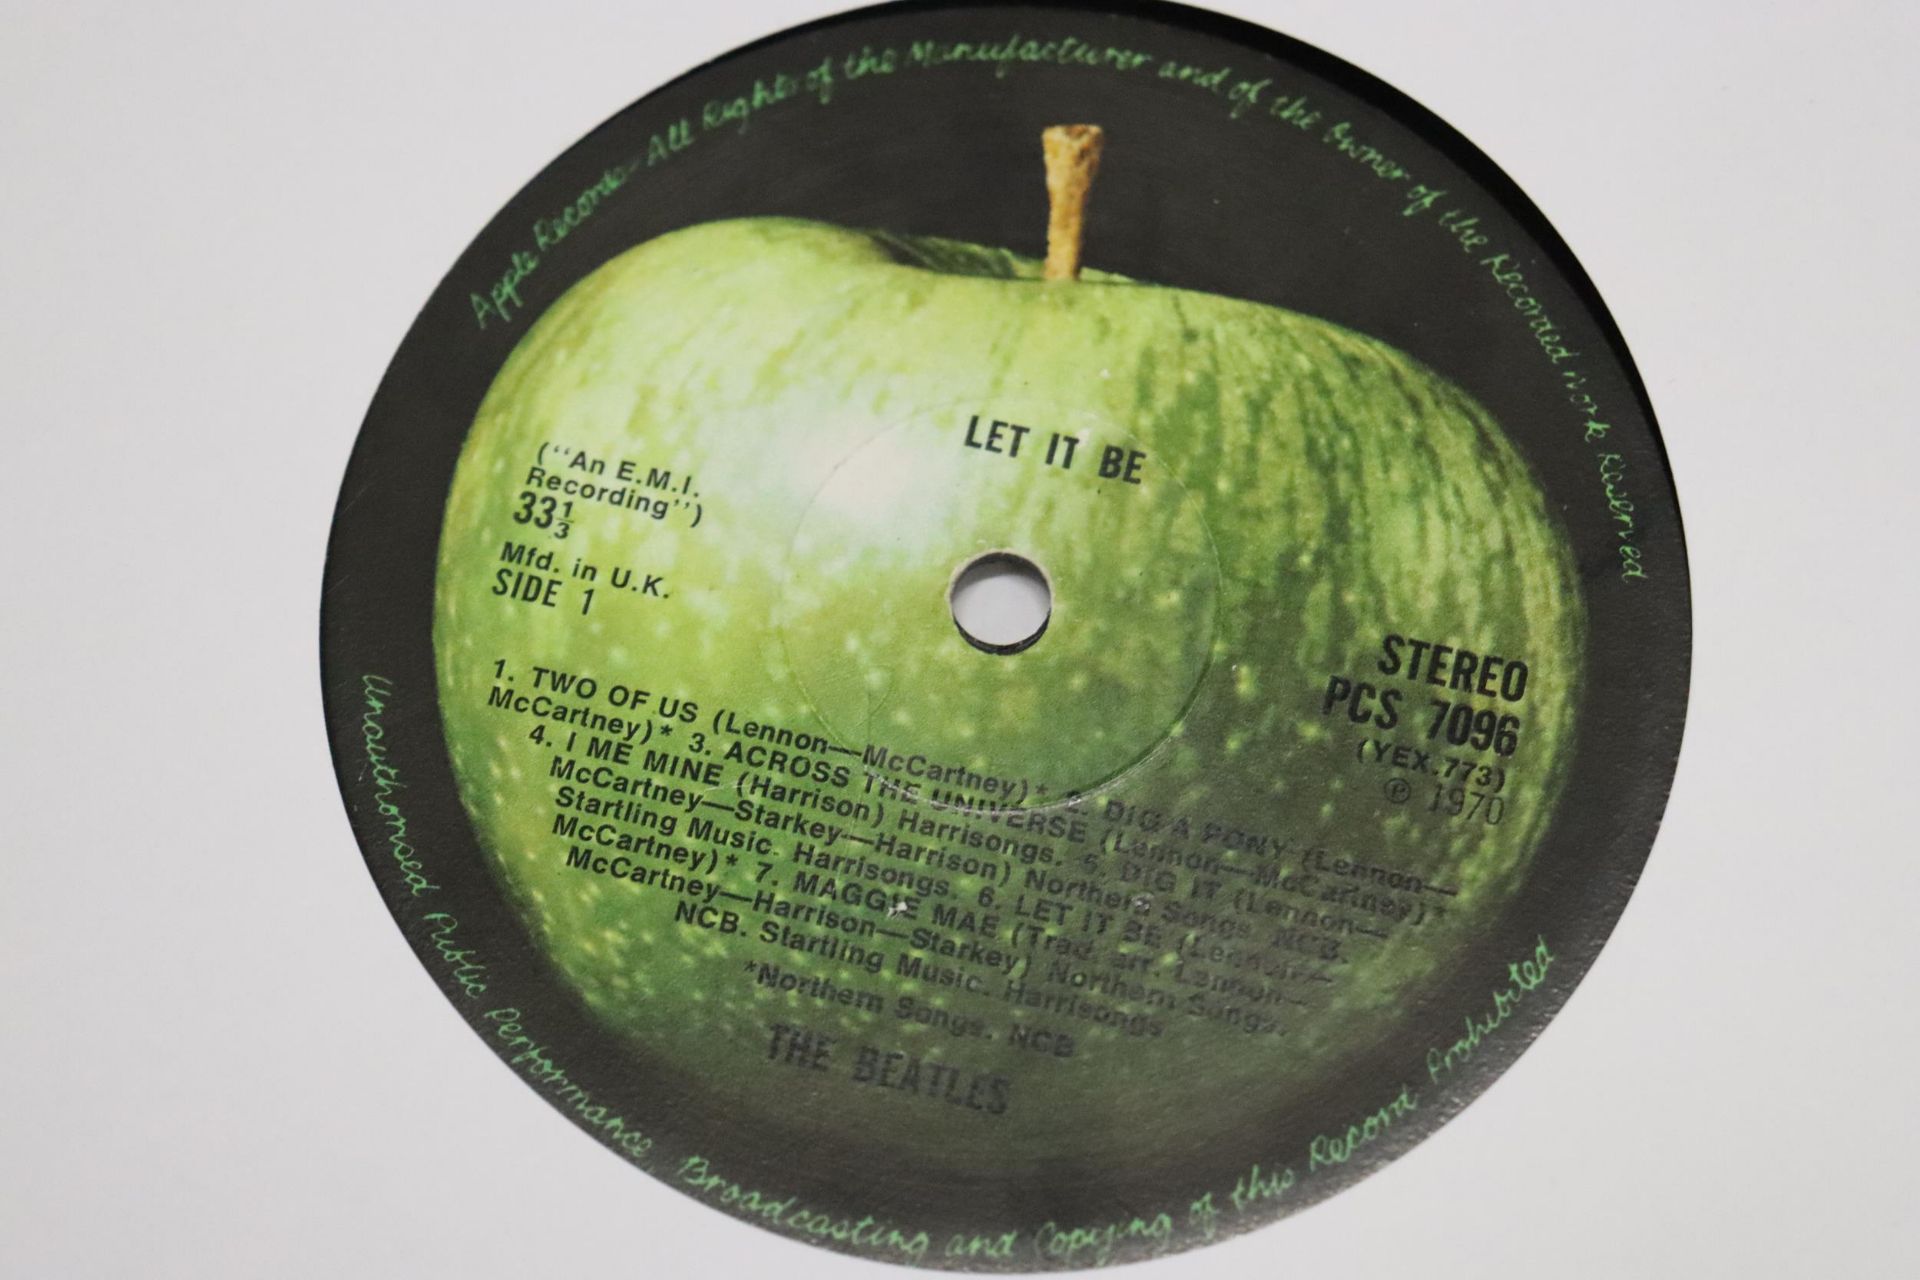 TWO BEATLES LP'S - LET IT BE (1970) AND THE BEATLES (1968) (NO COVERS) - Image 7 of 7